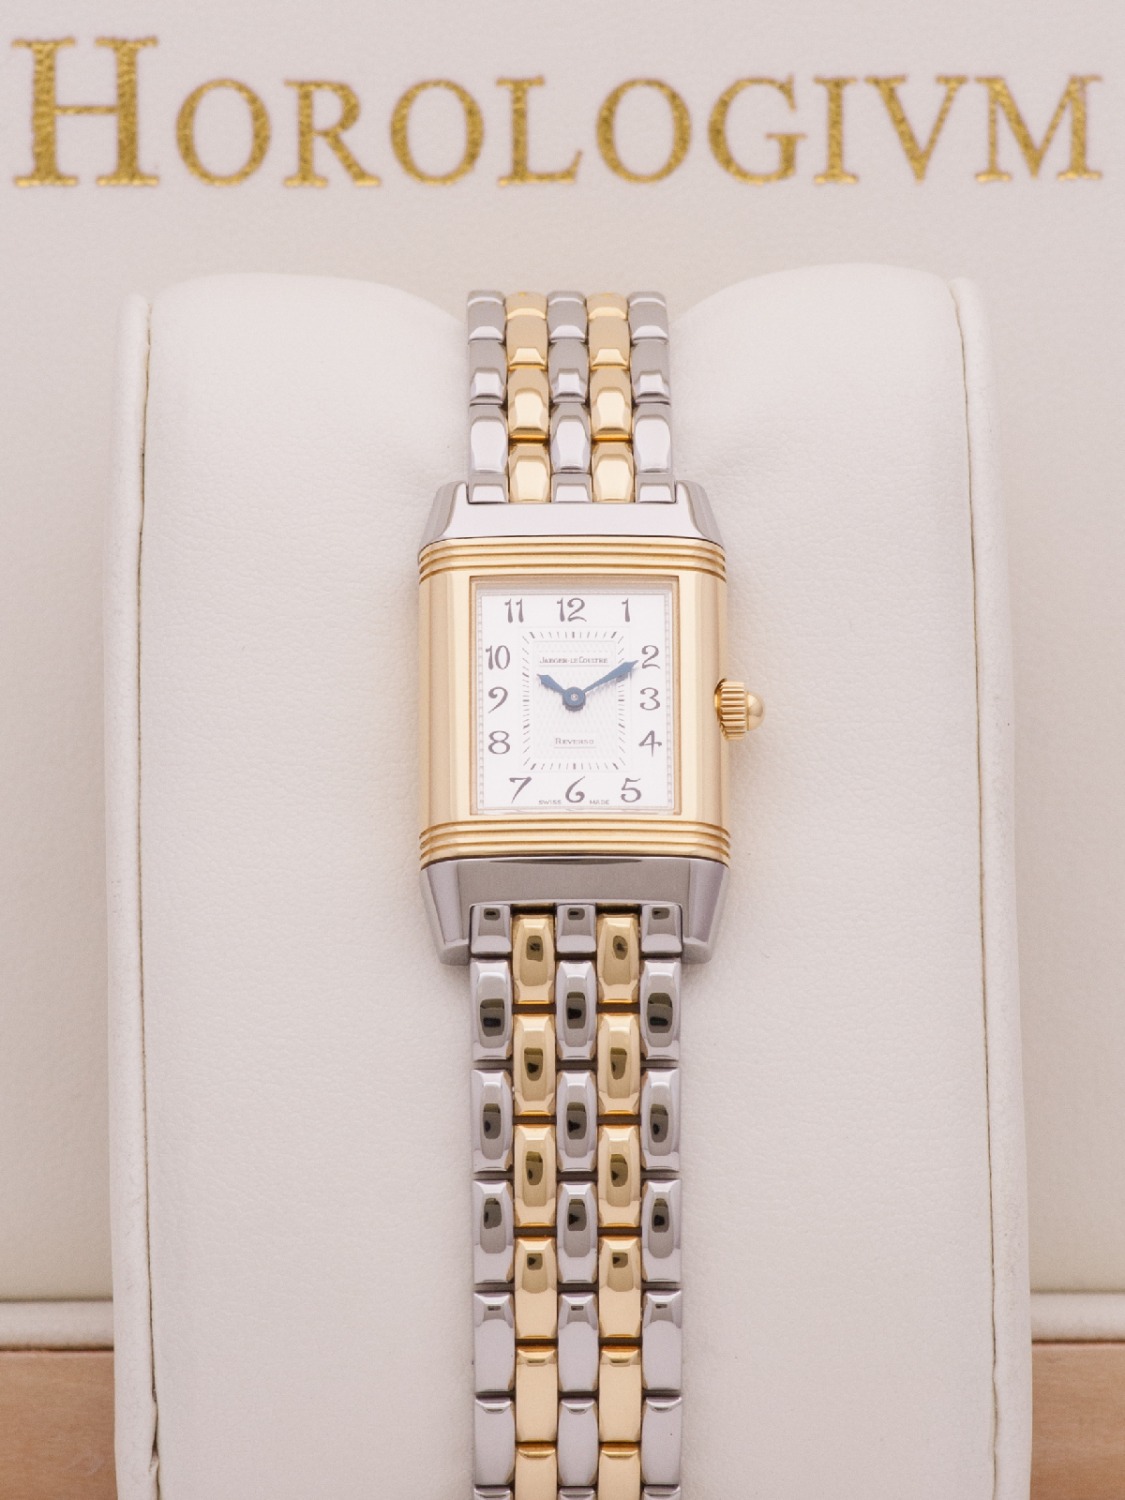 Jaeger-LeCoultre Reverso Duetto watch, two - tone (bi - colored) silver and yellow gold